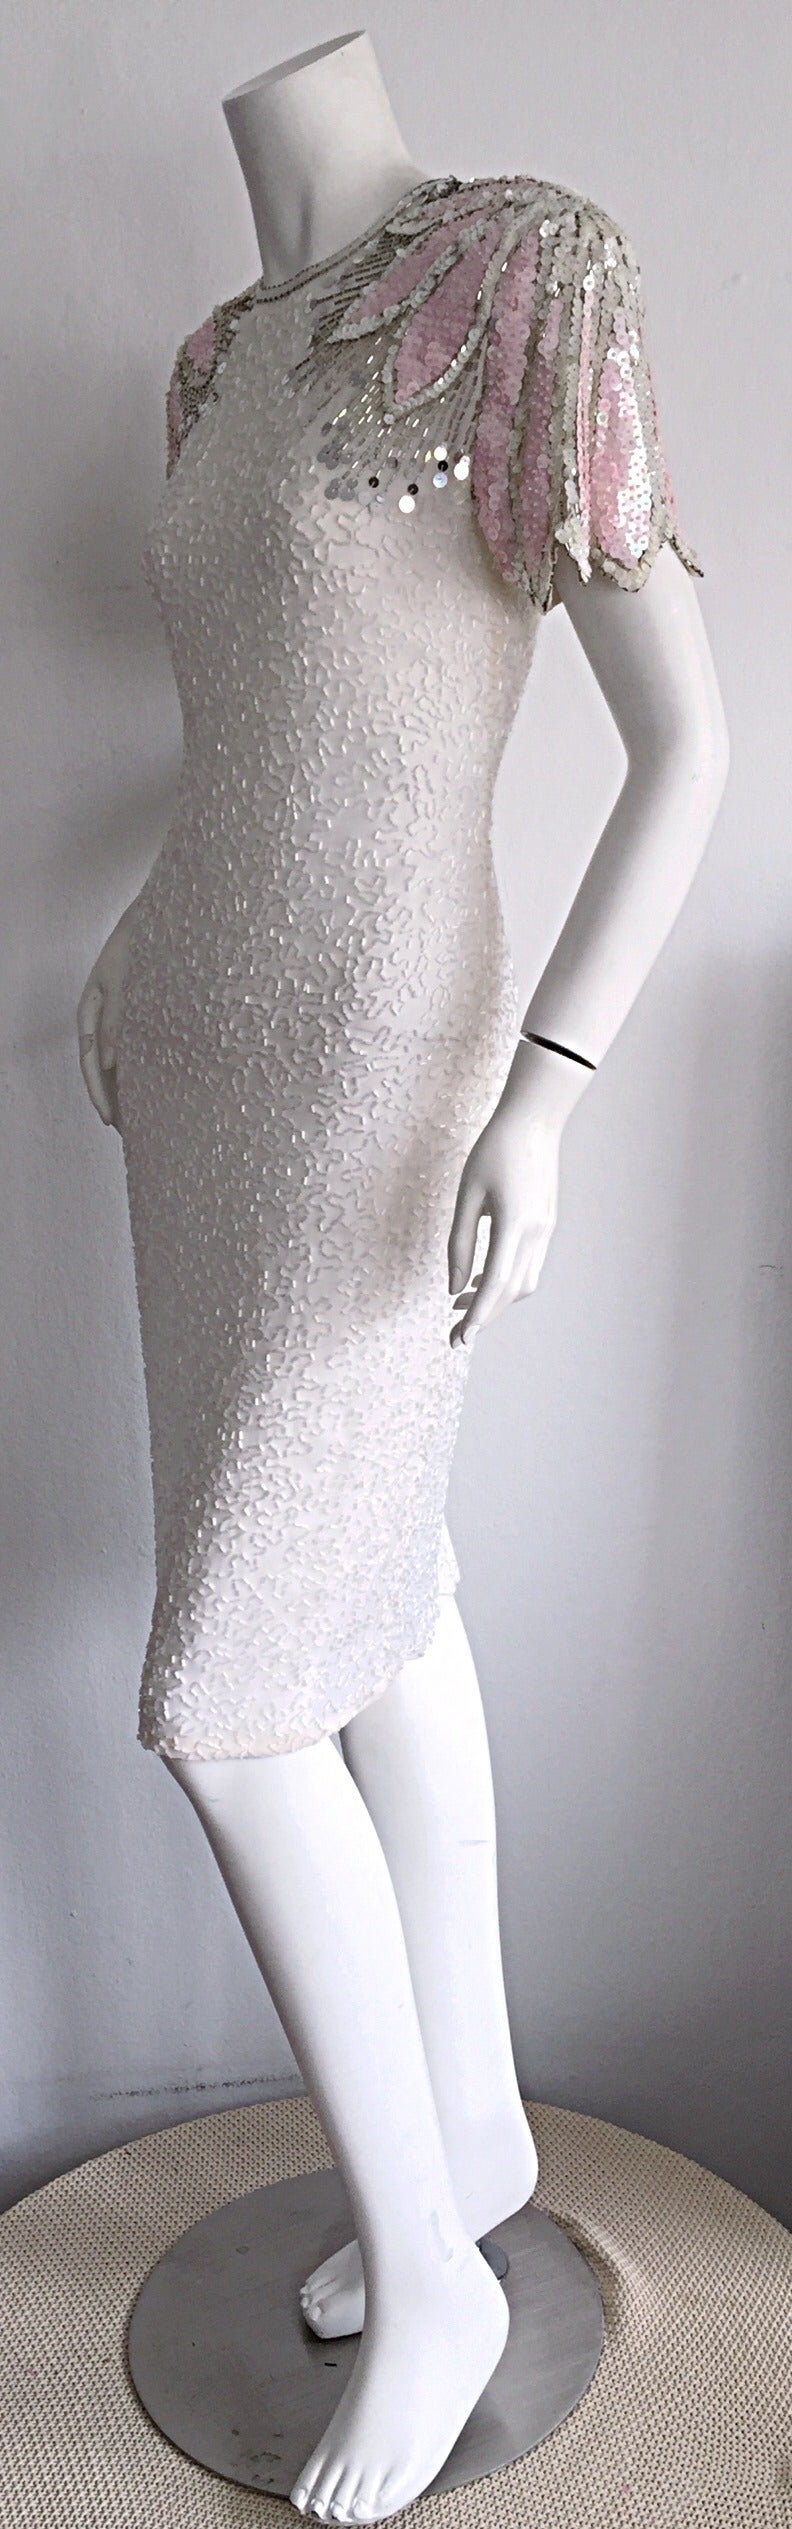 Stunning Vintage White + Pink + Silver Beaded Sequin Illusion Dress w/ Open Back 3